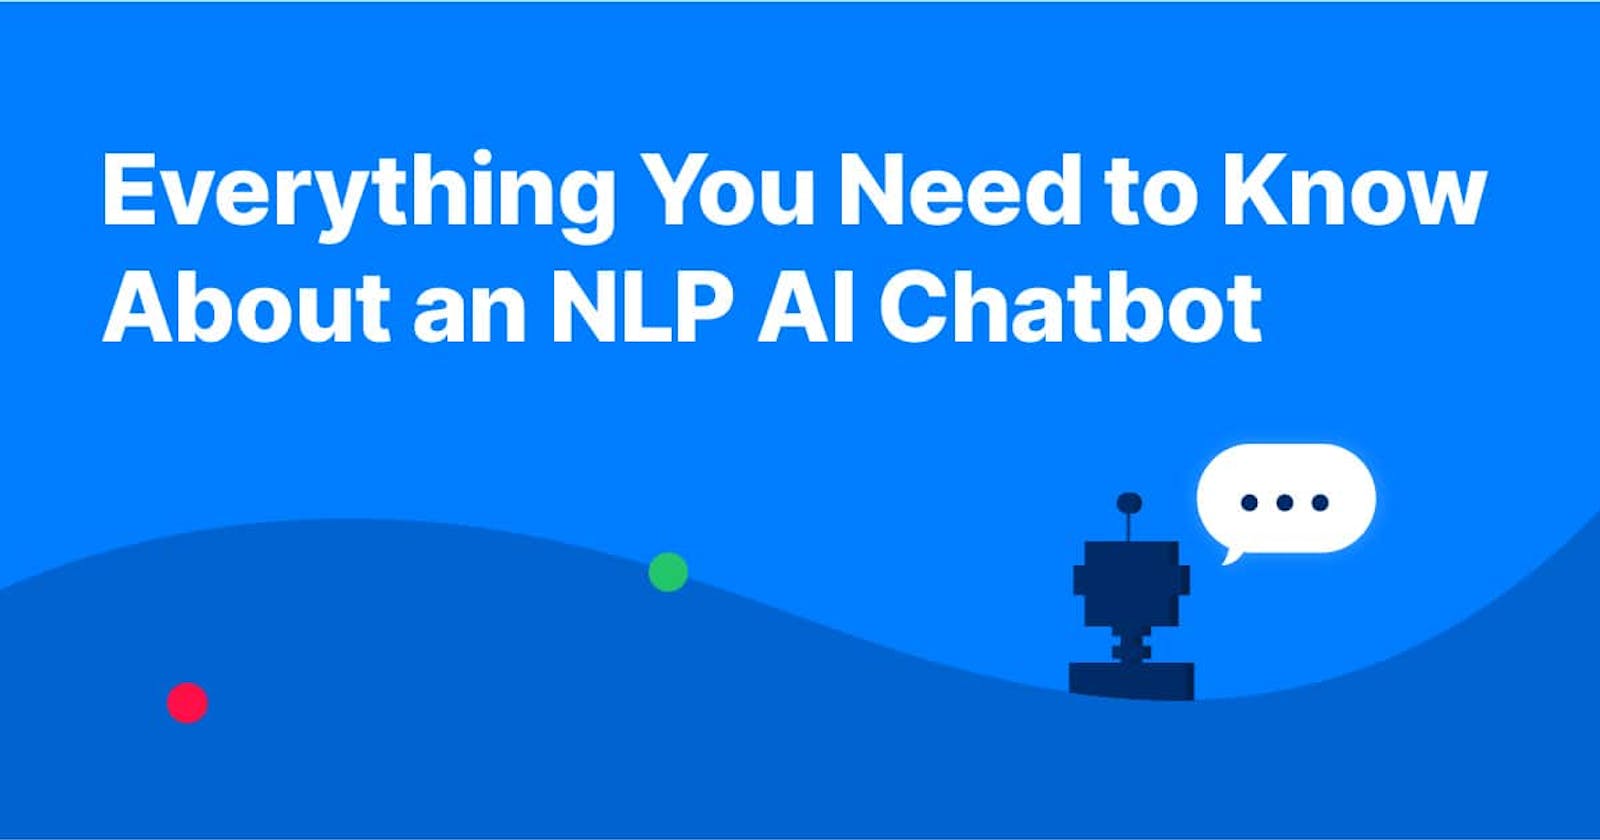 Chatbots with NLP - An overview of how NLP can be used to power conversational agents, also known as chatbots.